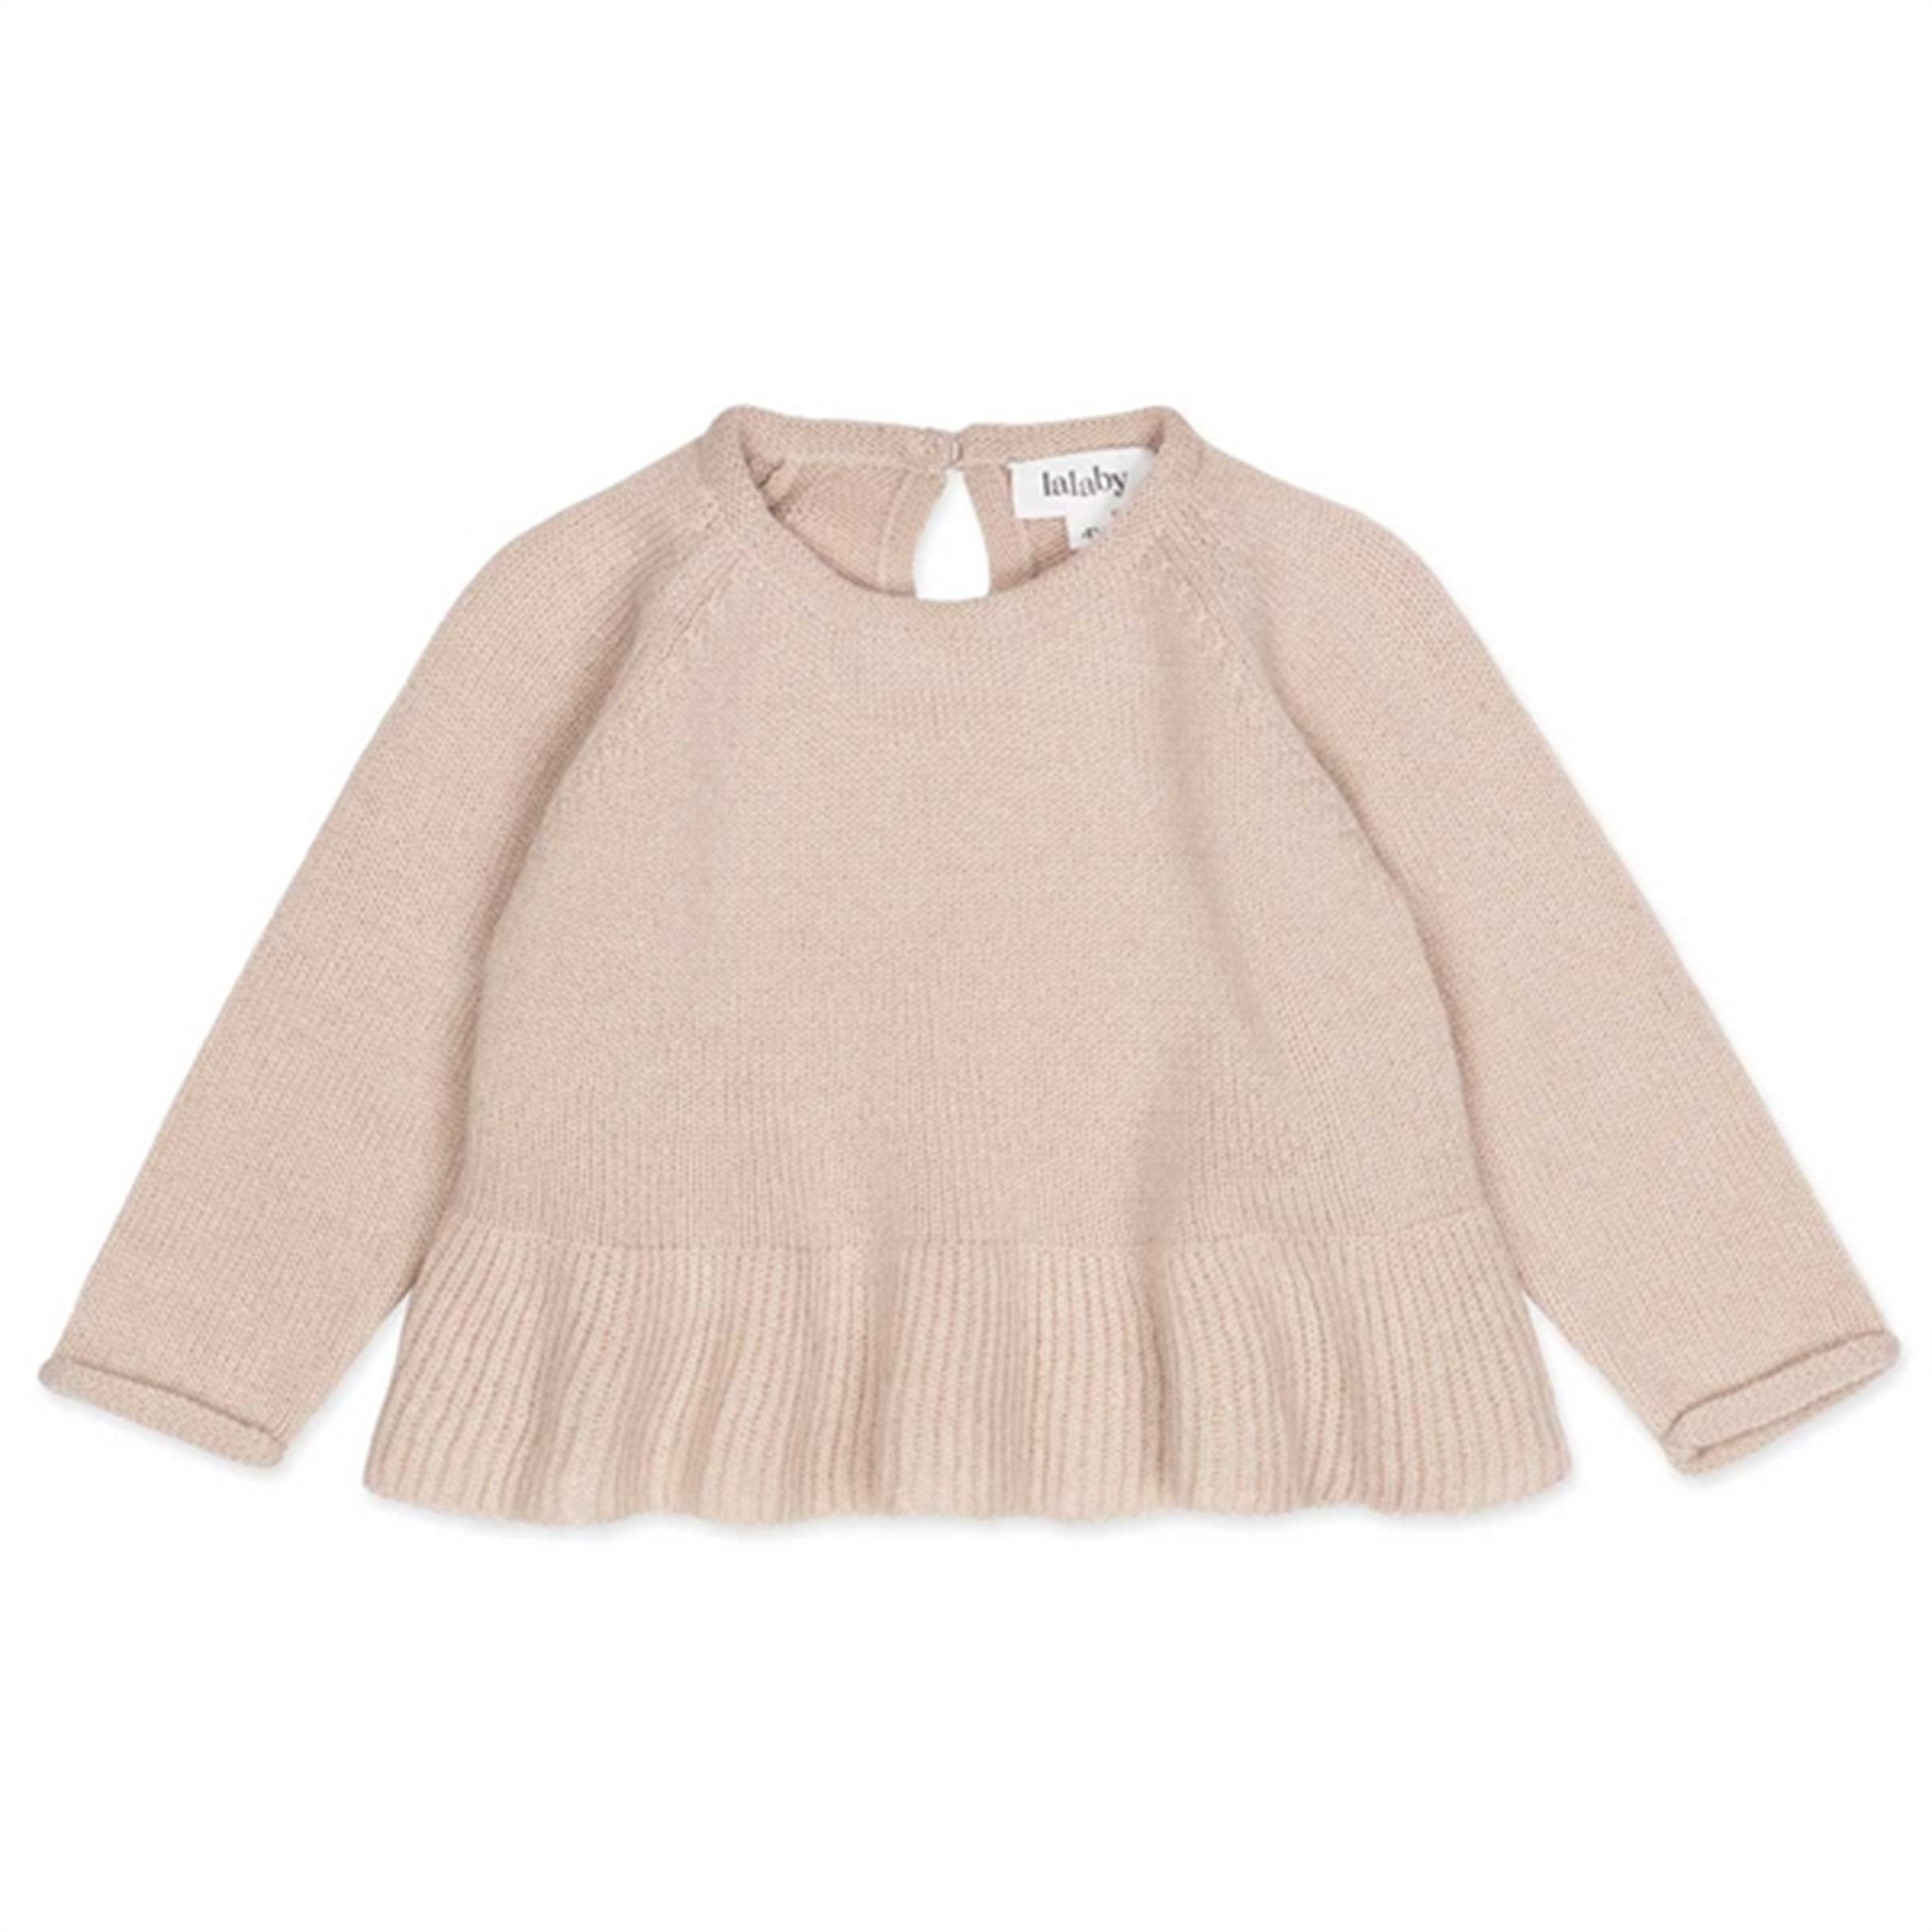 lalaby Powder Cashmere Ava Jumper